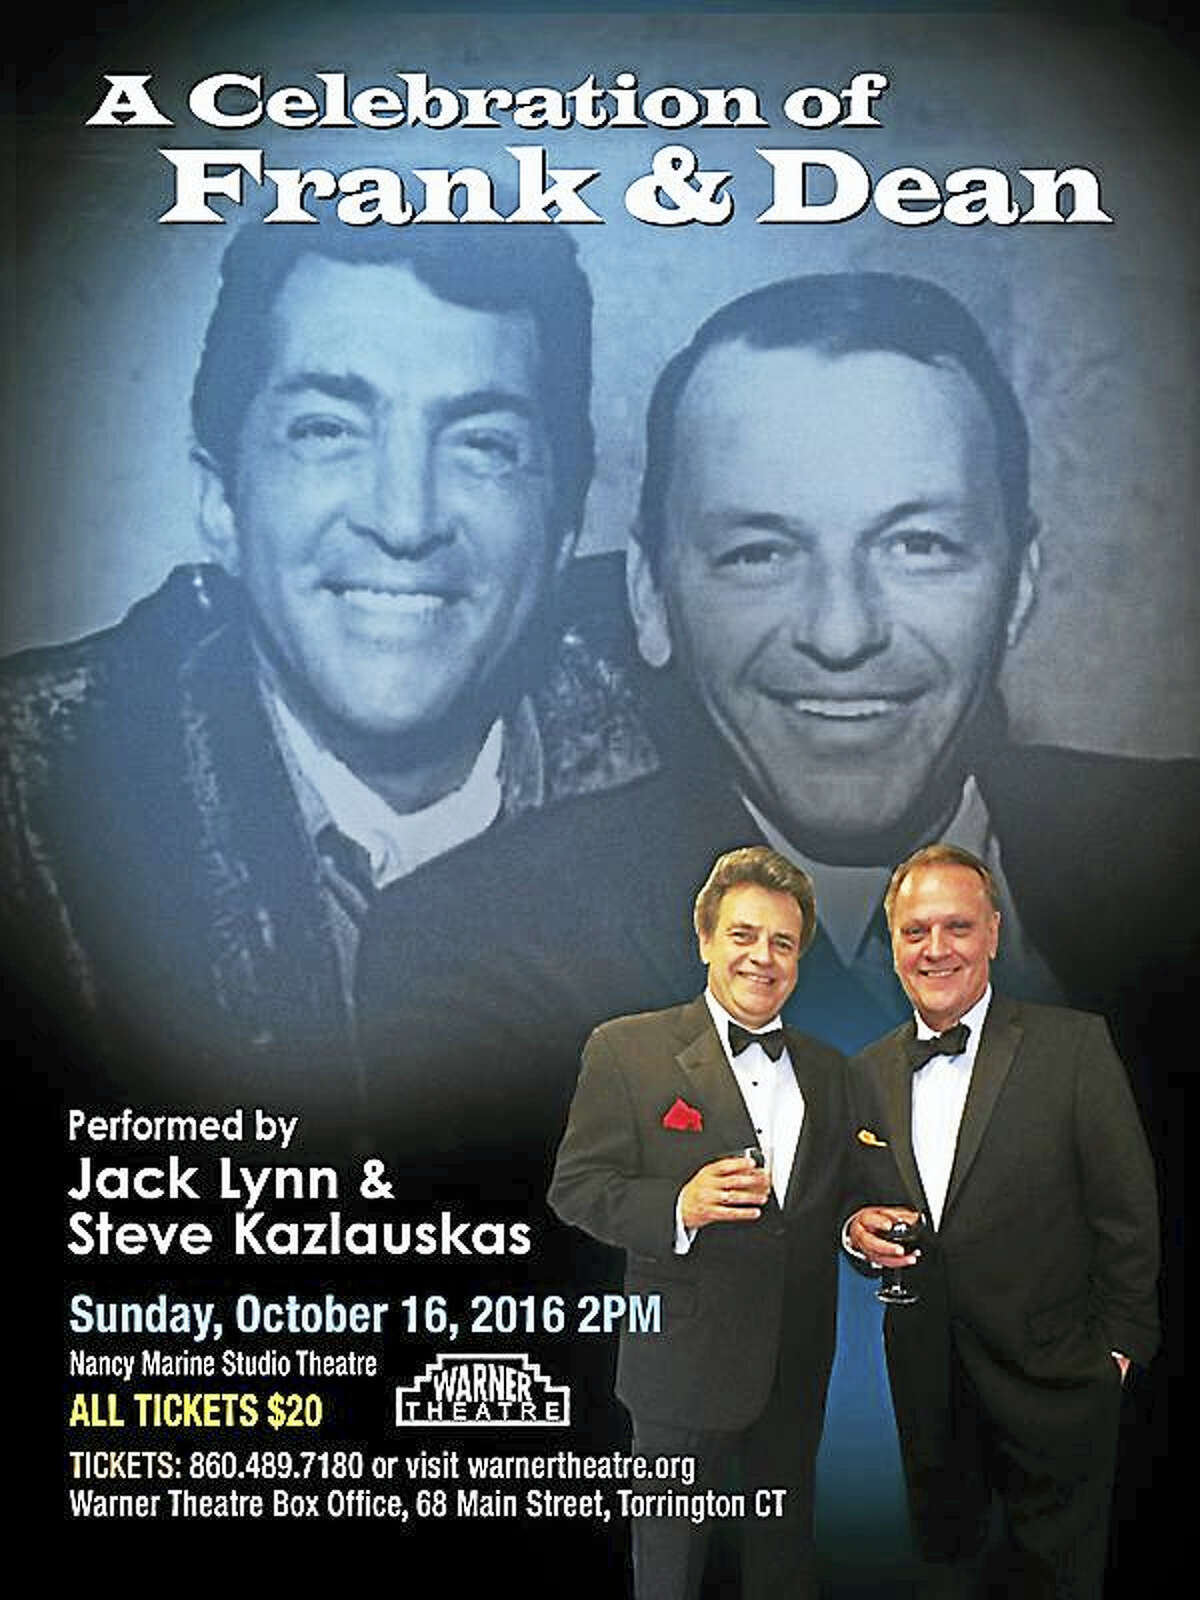 Contributed photo Jack Lynn and Steve Kazlauskas will perform A Celebration of Frank and Dean at the Warner Theatre’s Nancy Marine Studio Theatre on Sunday, Oct. 16.